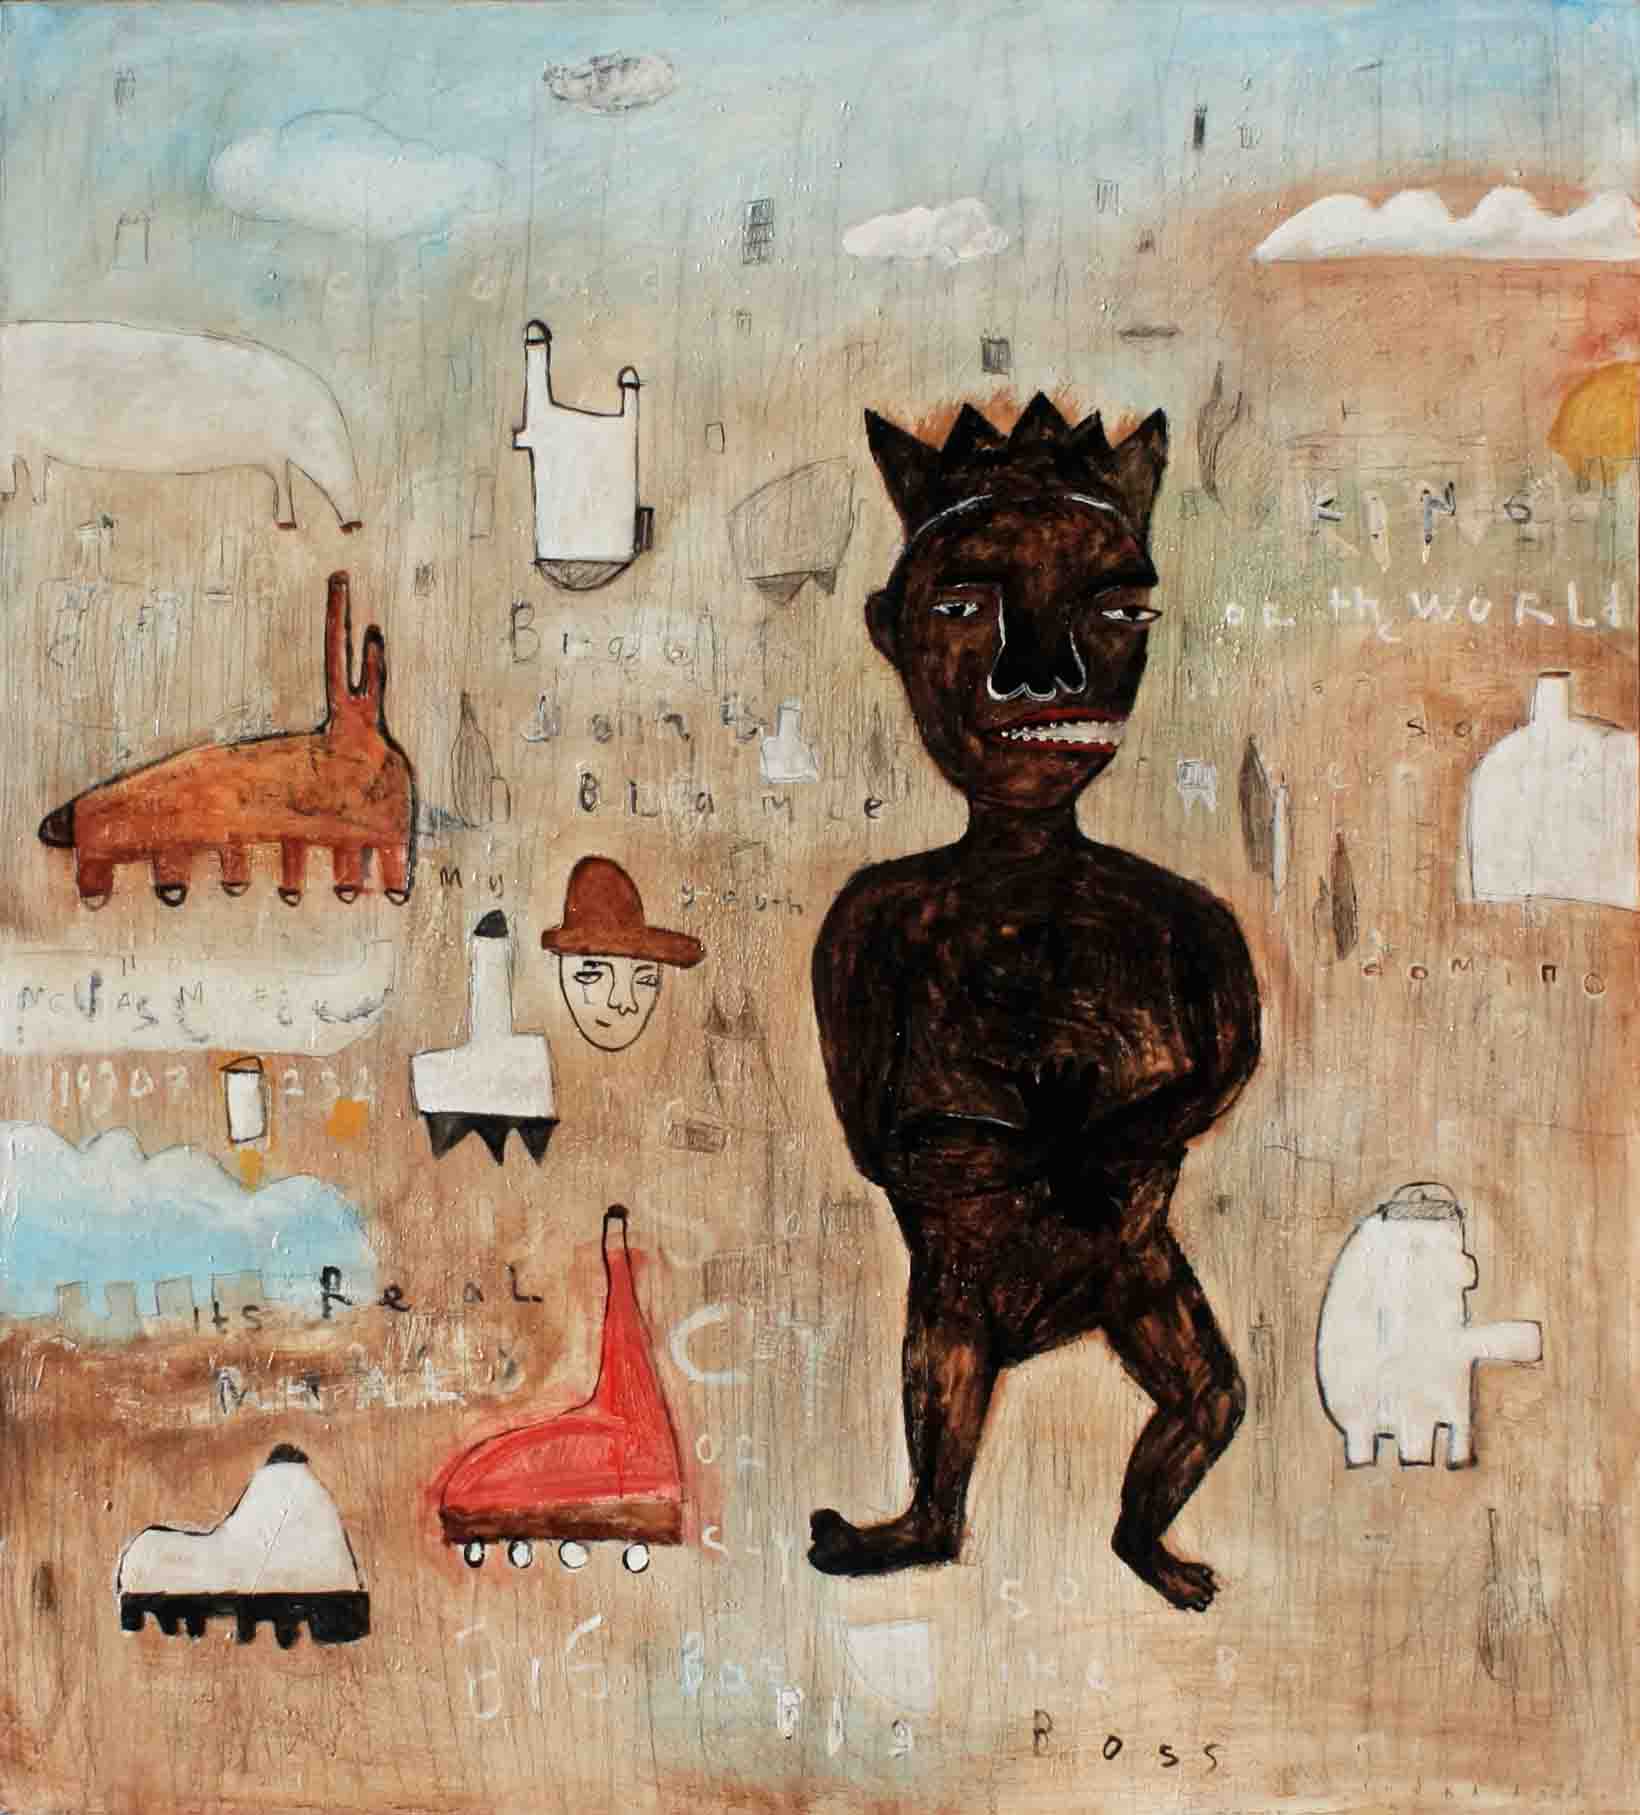 story about king, 180X200cm.A O C, 2013